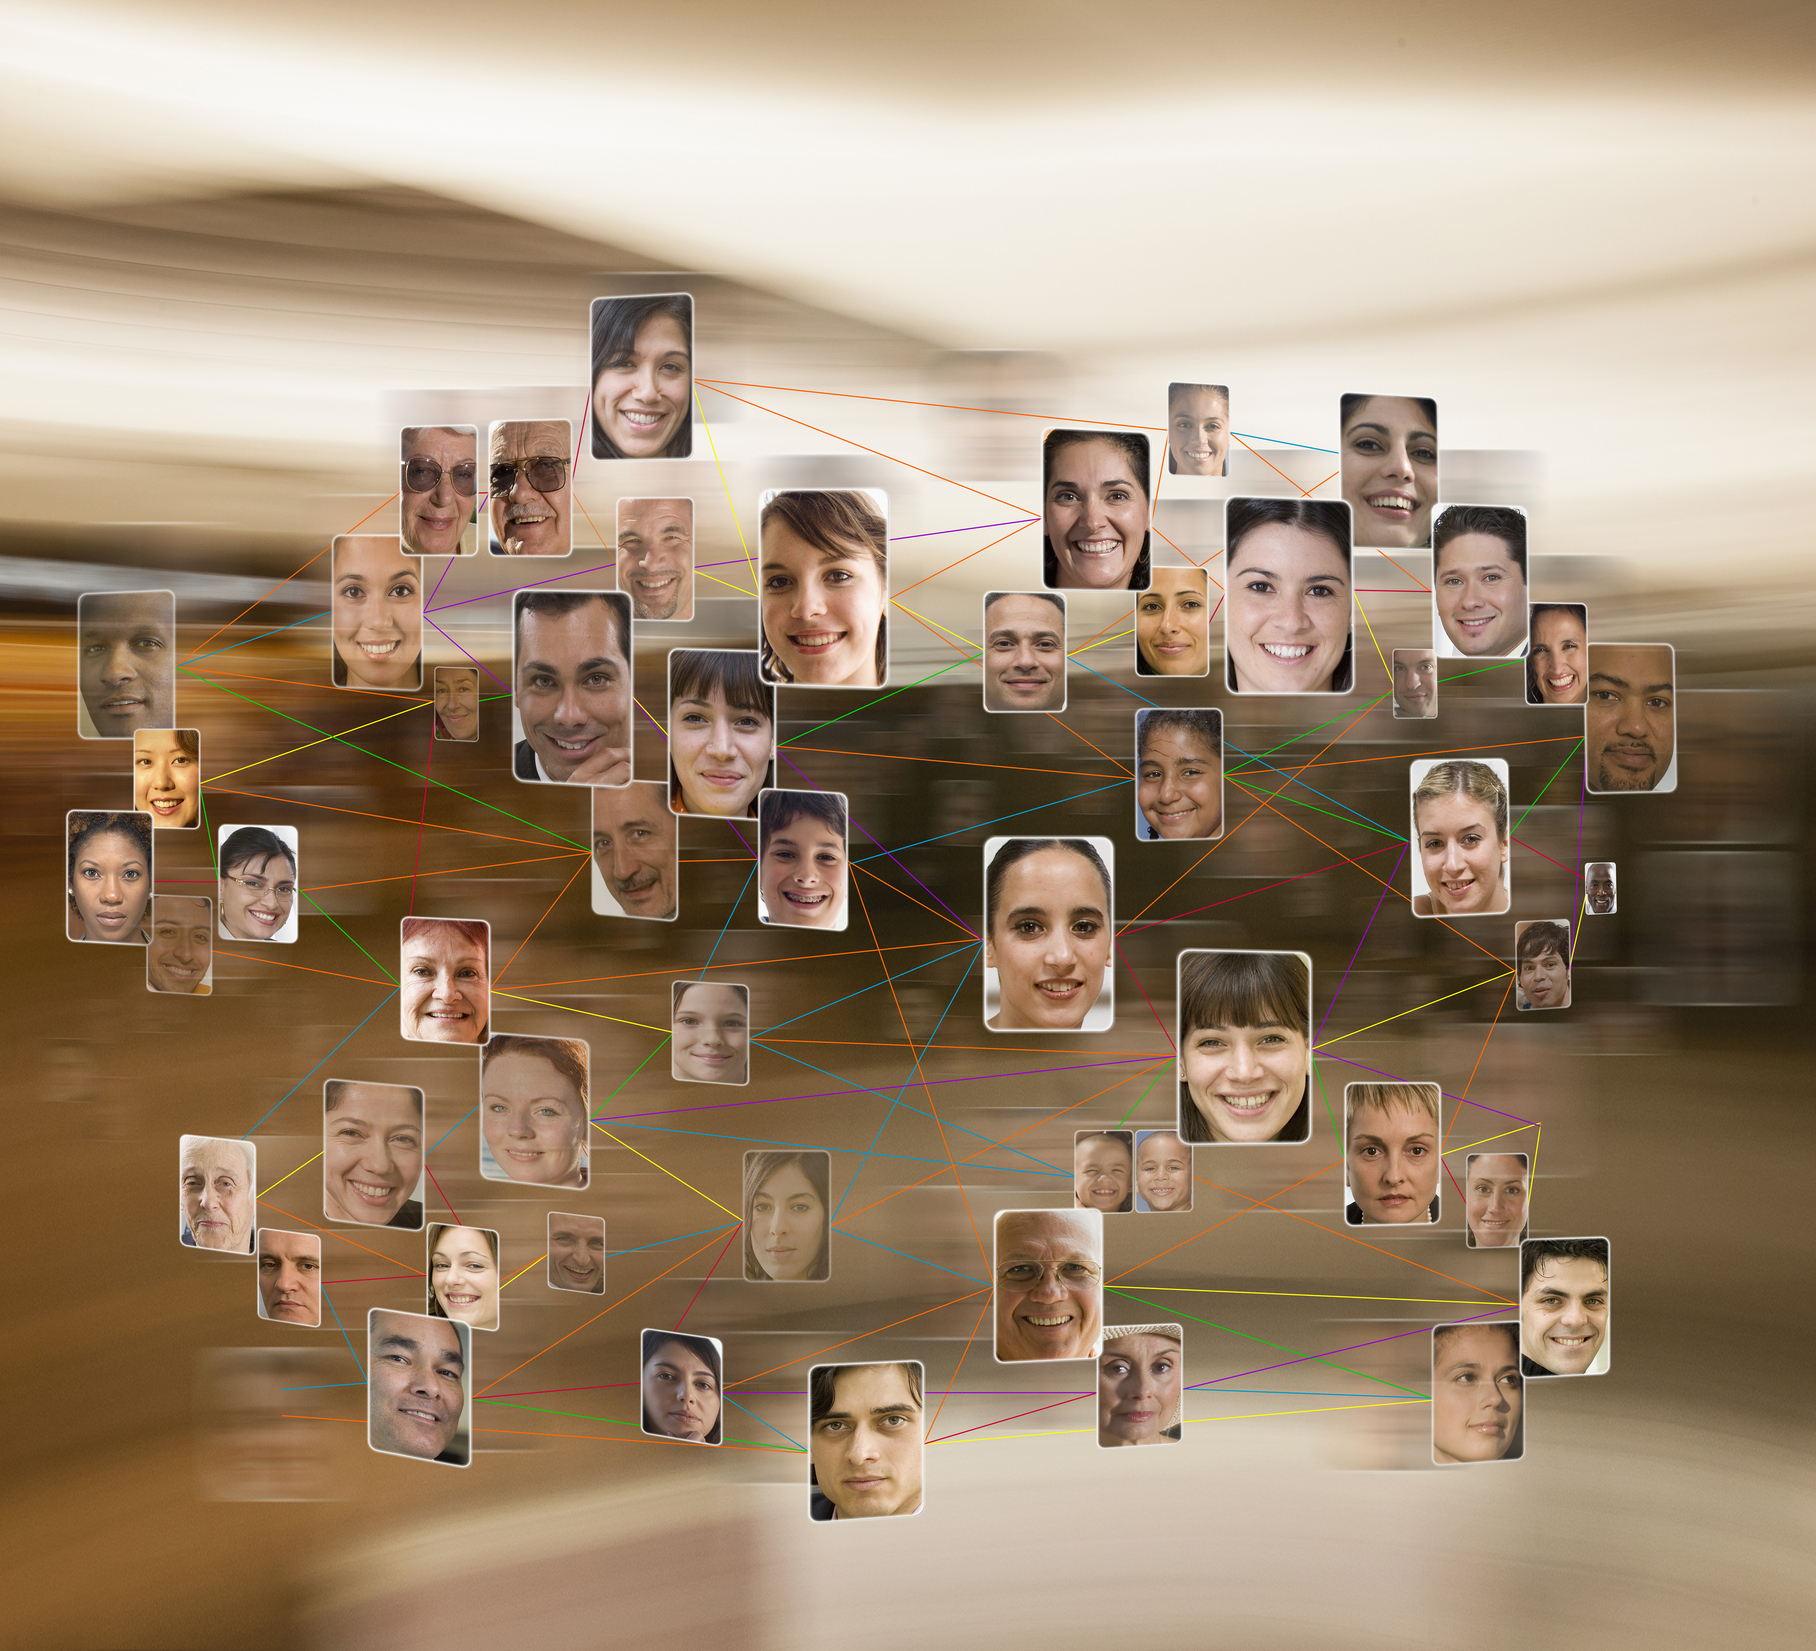 Image of a web of connected headshots symbolizing social or professional networks